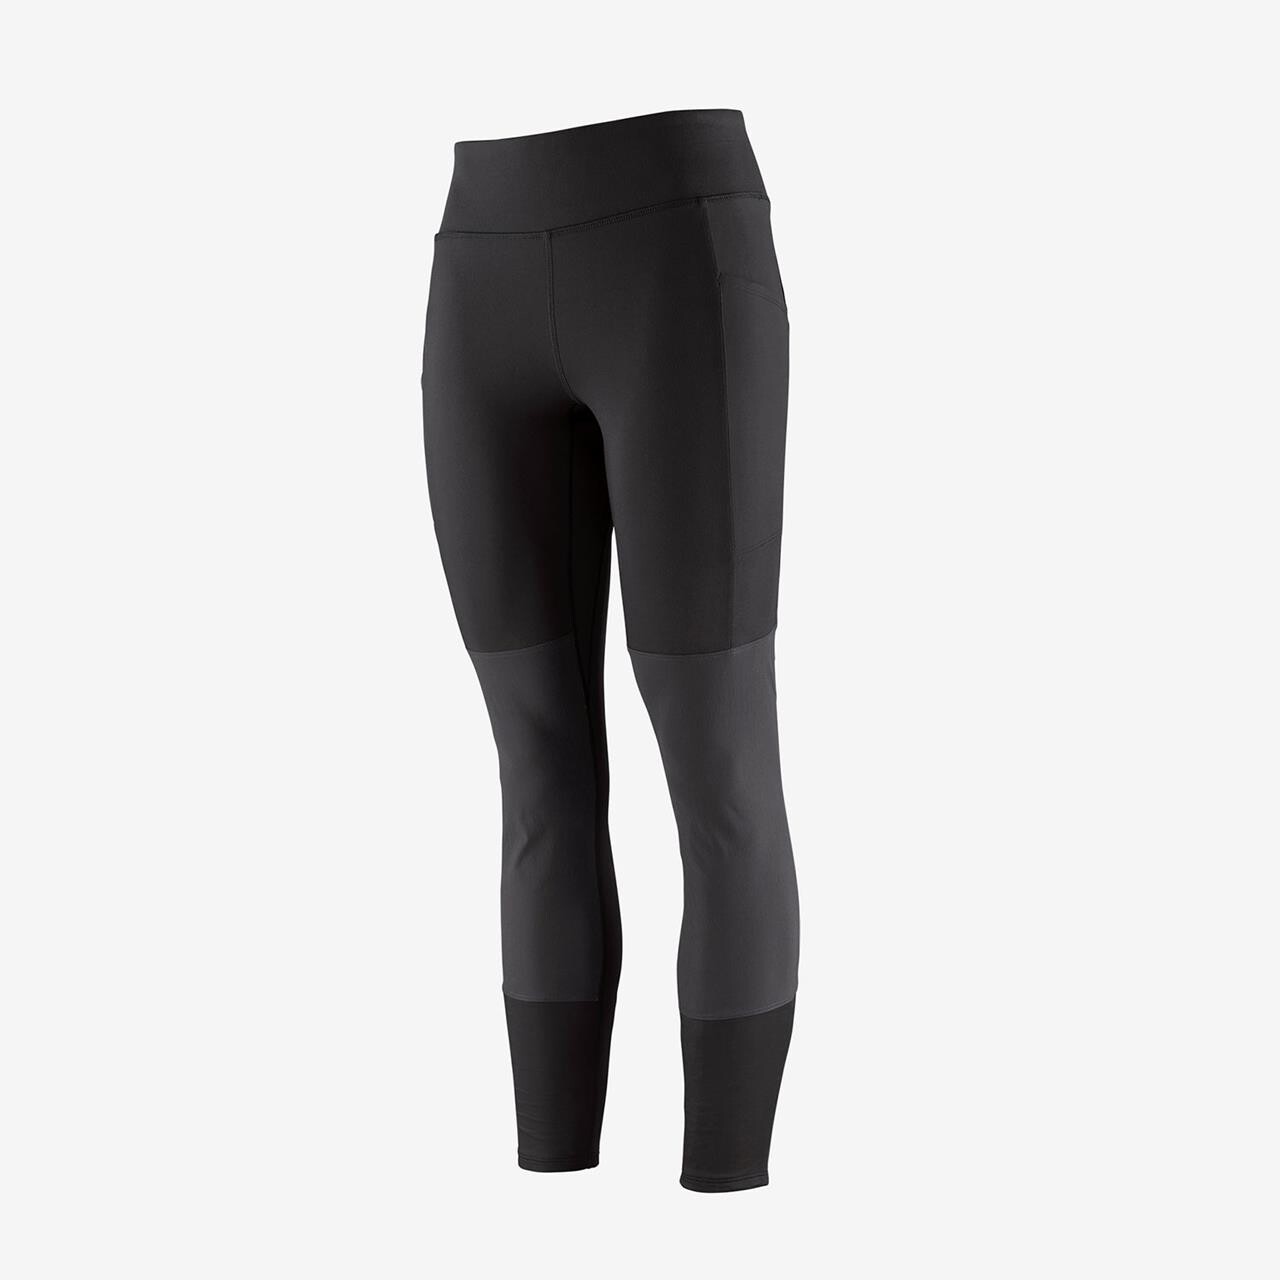 8: Patagonia Womens Pack Out Hike Tights (Sort (BLACK) Large)